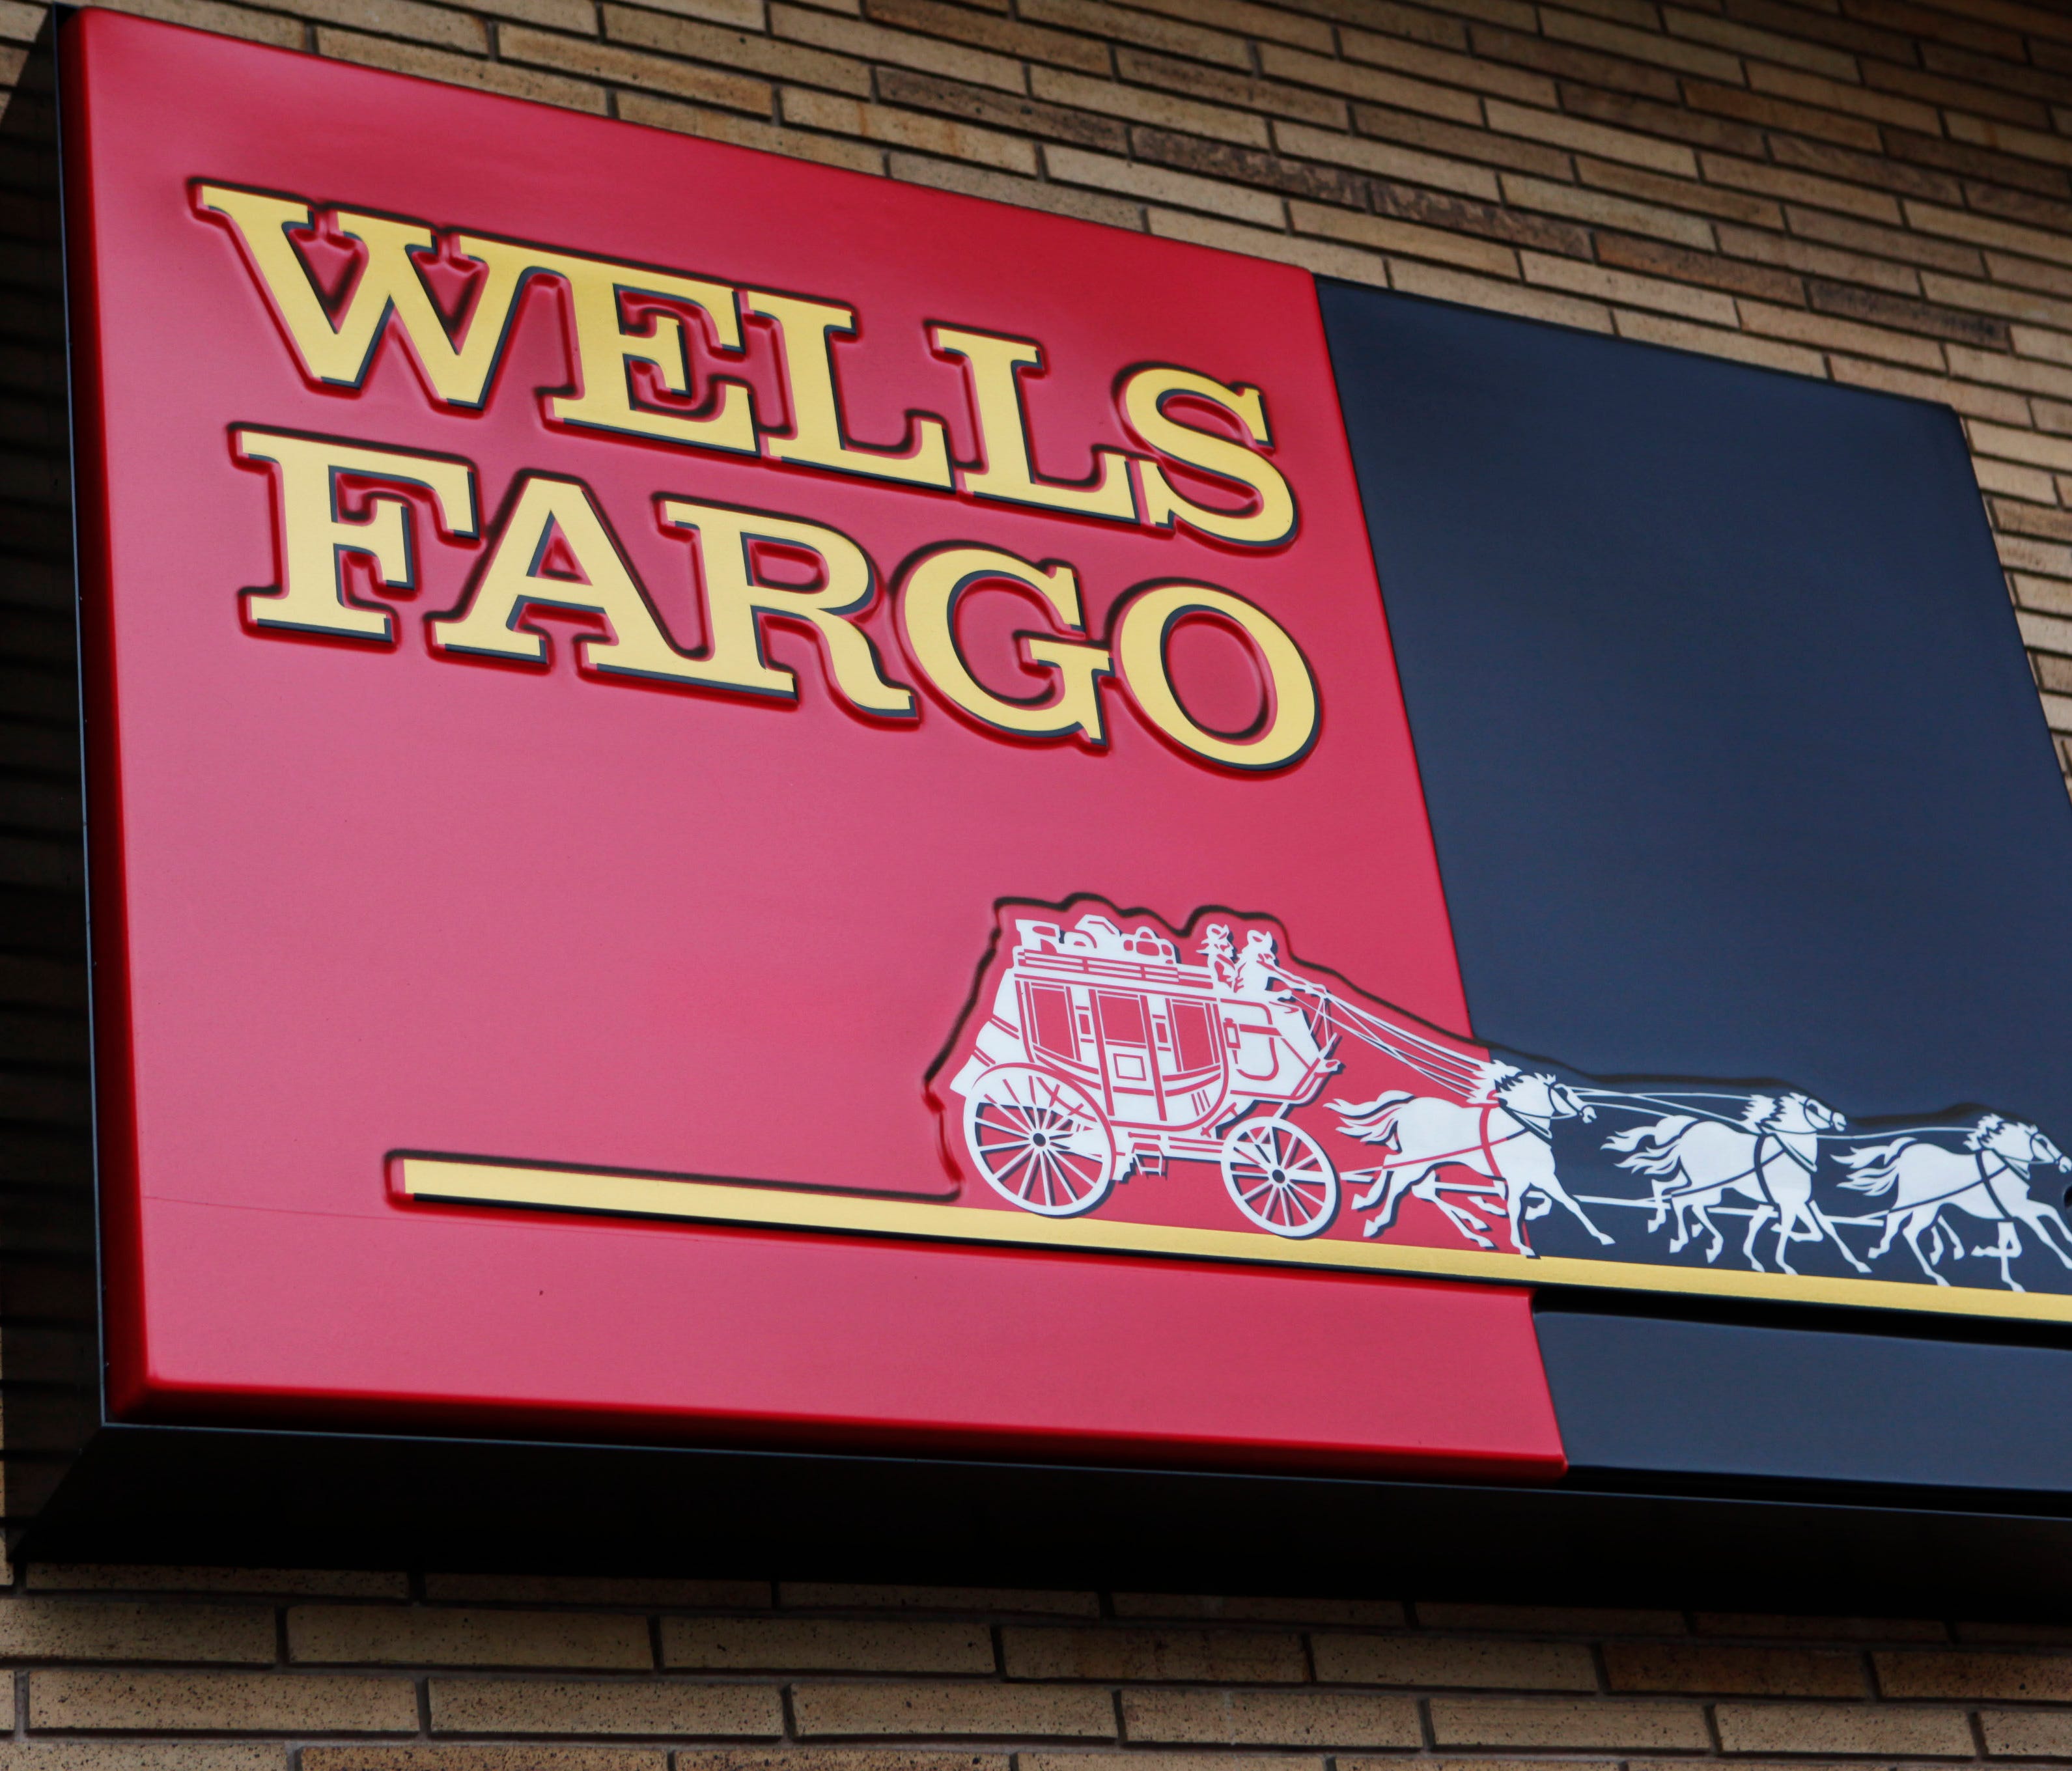 File photo taken in 2010 shows a Wells Fargo sign outside a bank branch in  Palo Alto, Calif.